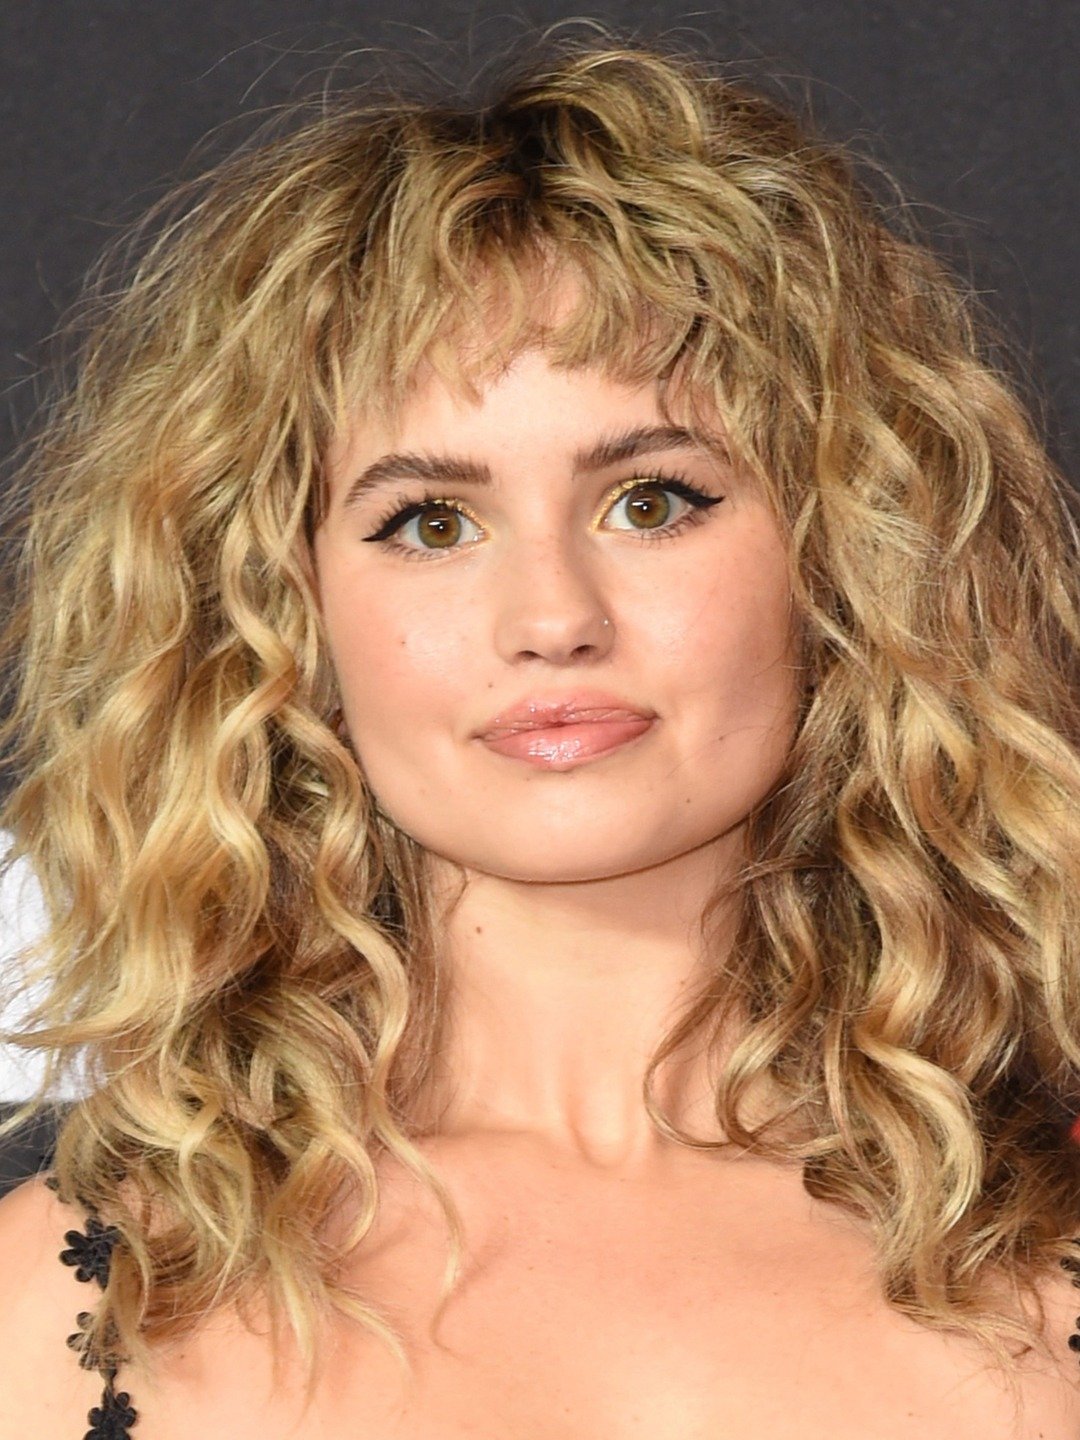 donna magsakay recommends naked debby ryan pic